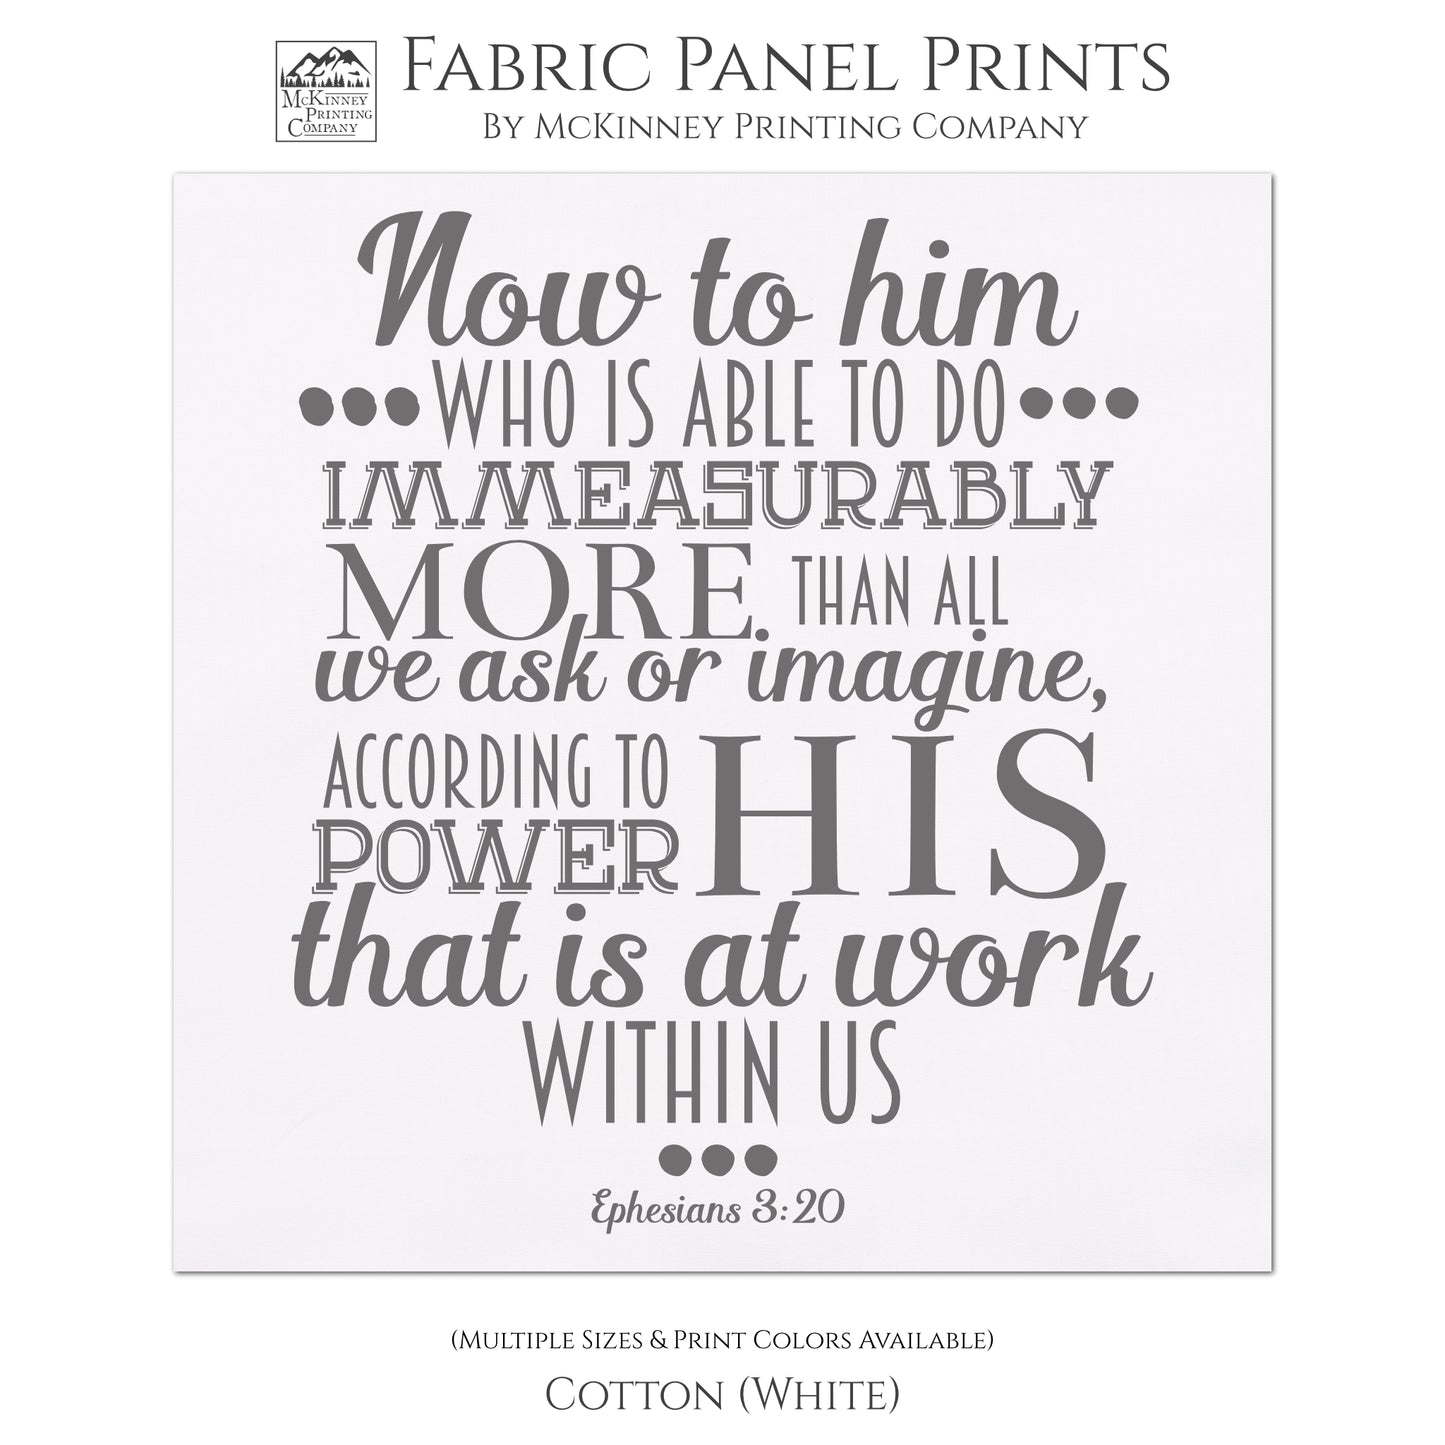 Now to him who is able to do immeasurably more than all we ask or imagine according to His power that is at work within us. - Ephesians 3 20 - Religious Fabric, Scripture Fabric, Quilting, Quilt Block, Sewing, Pillow, Wall Art - Cotton, White